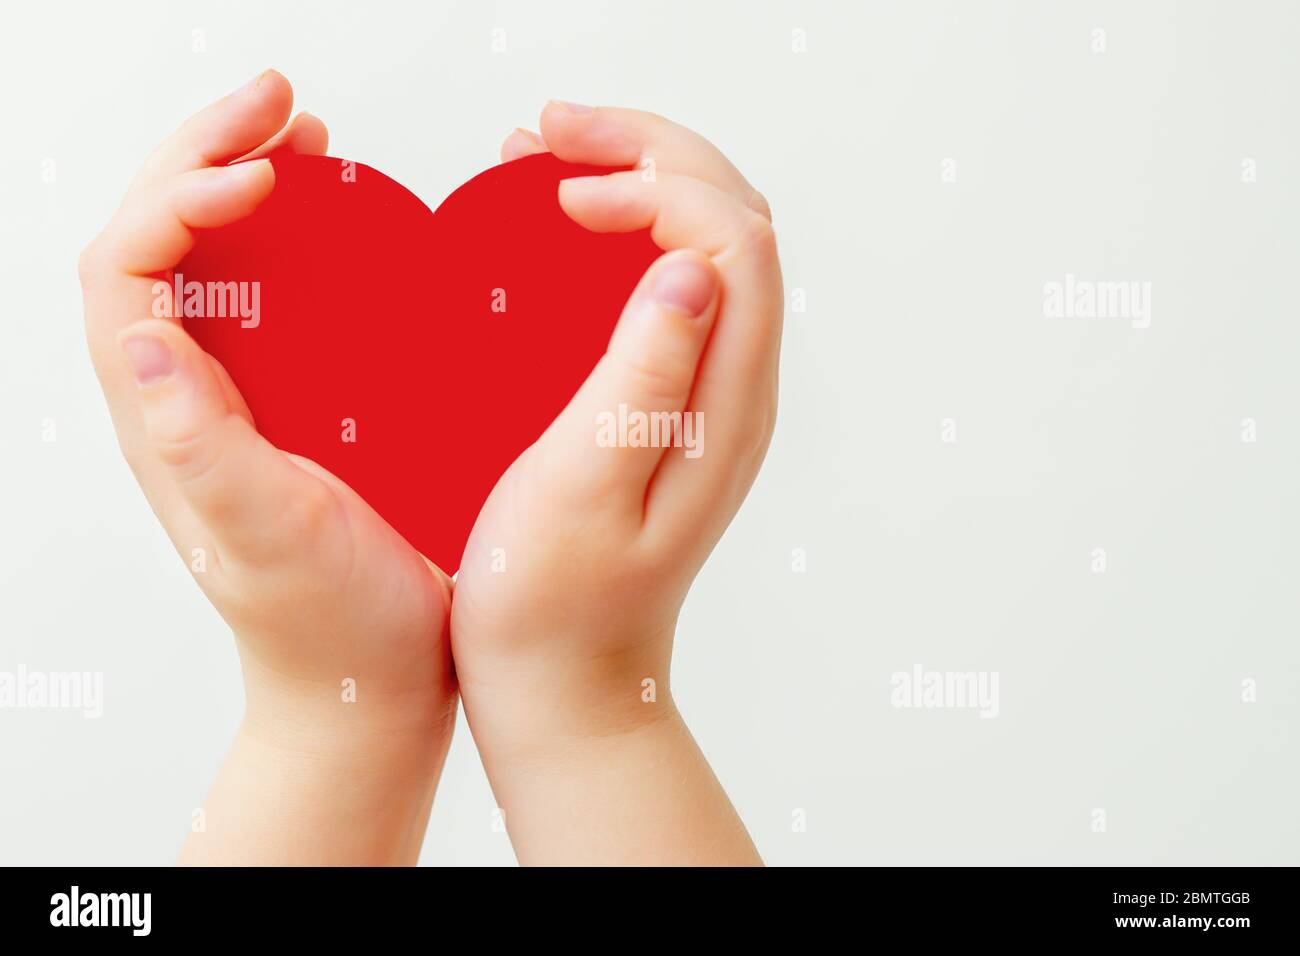 Closeup of child's hands holding paper red heart on white background. Concept of love. Stock Photo